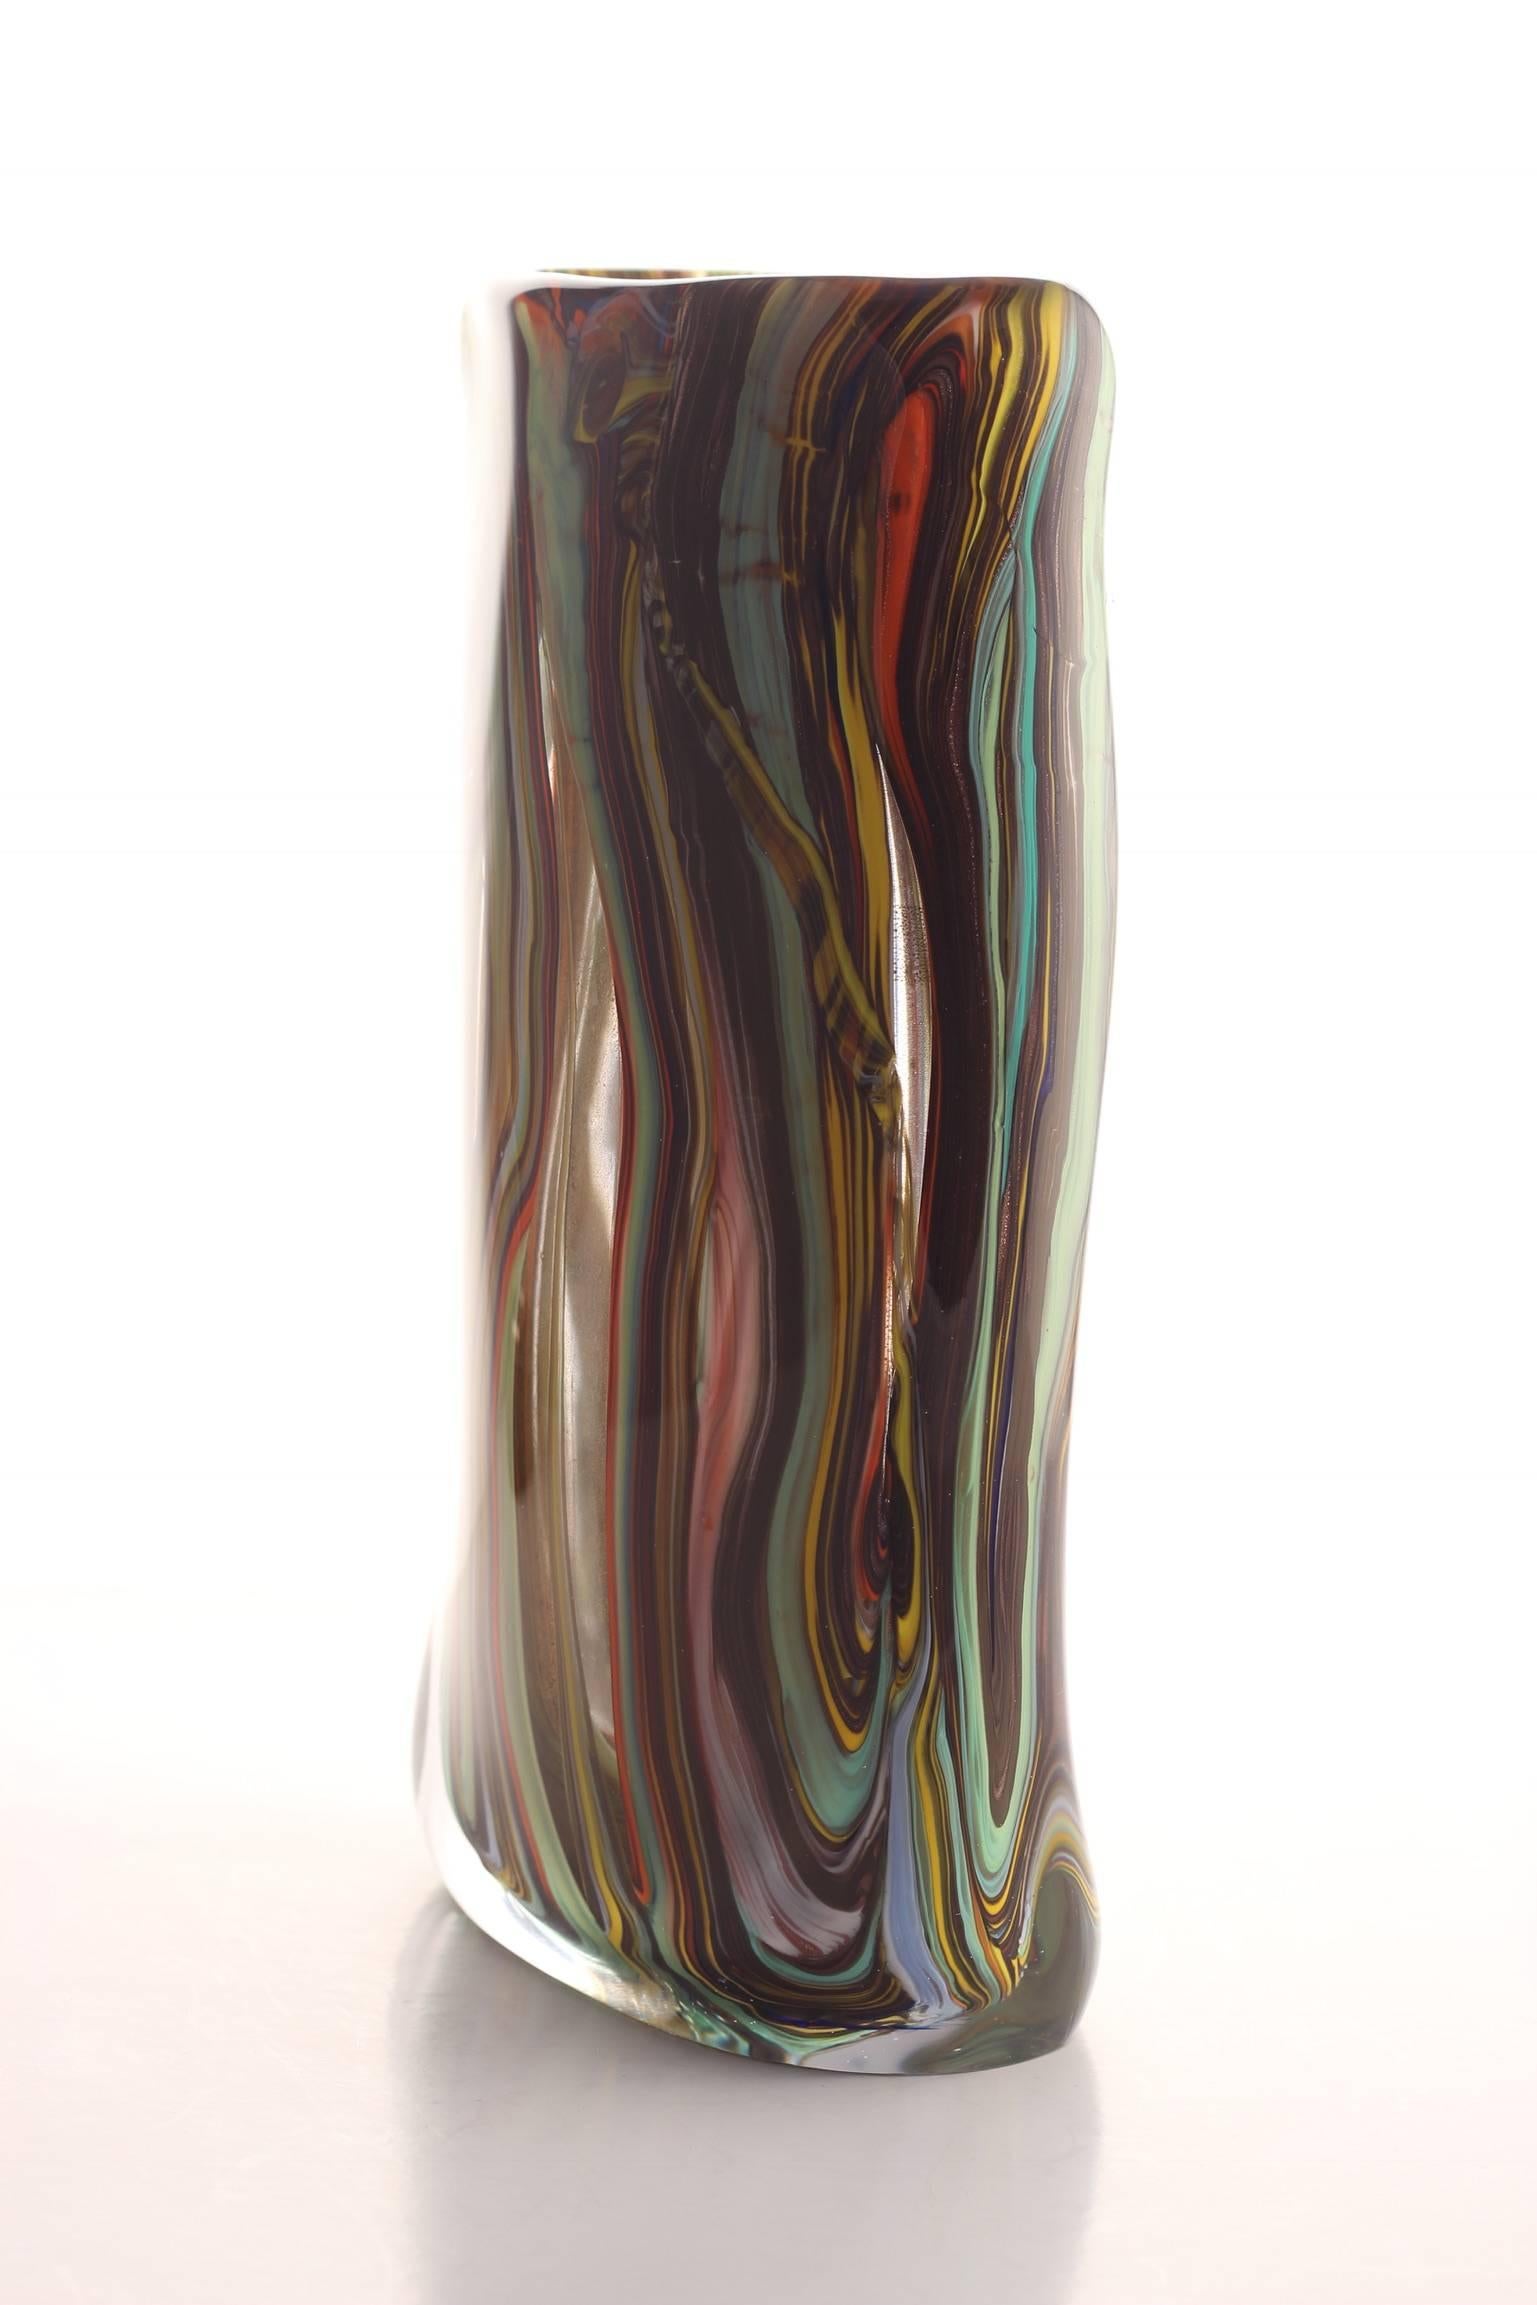 Art Glass Murano Vase Signed Colored and Gold Vase by Giuliano Tosi